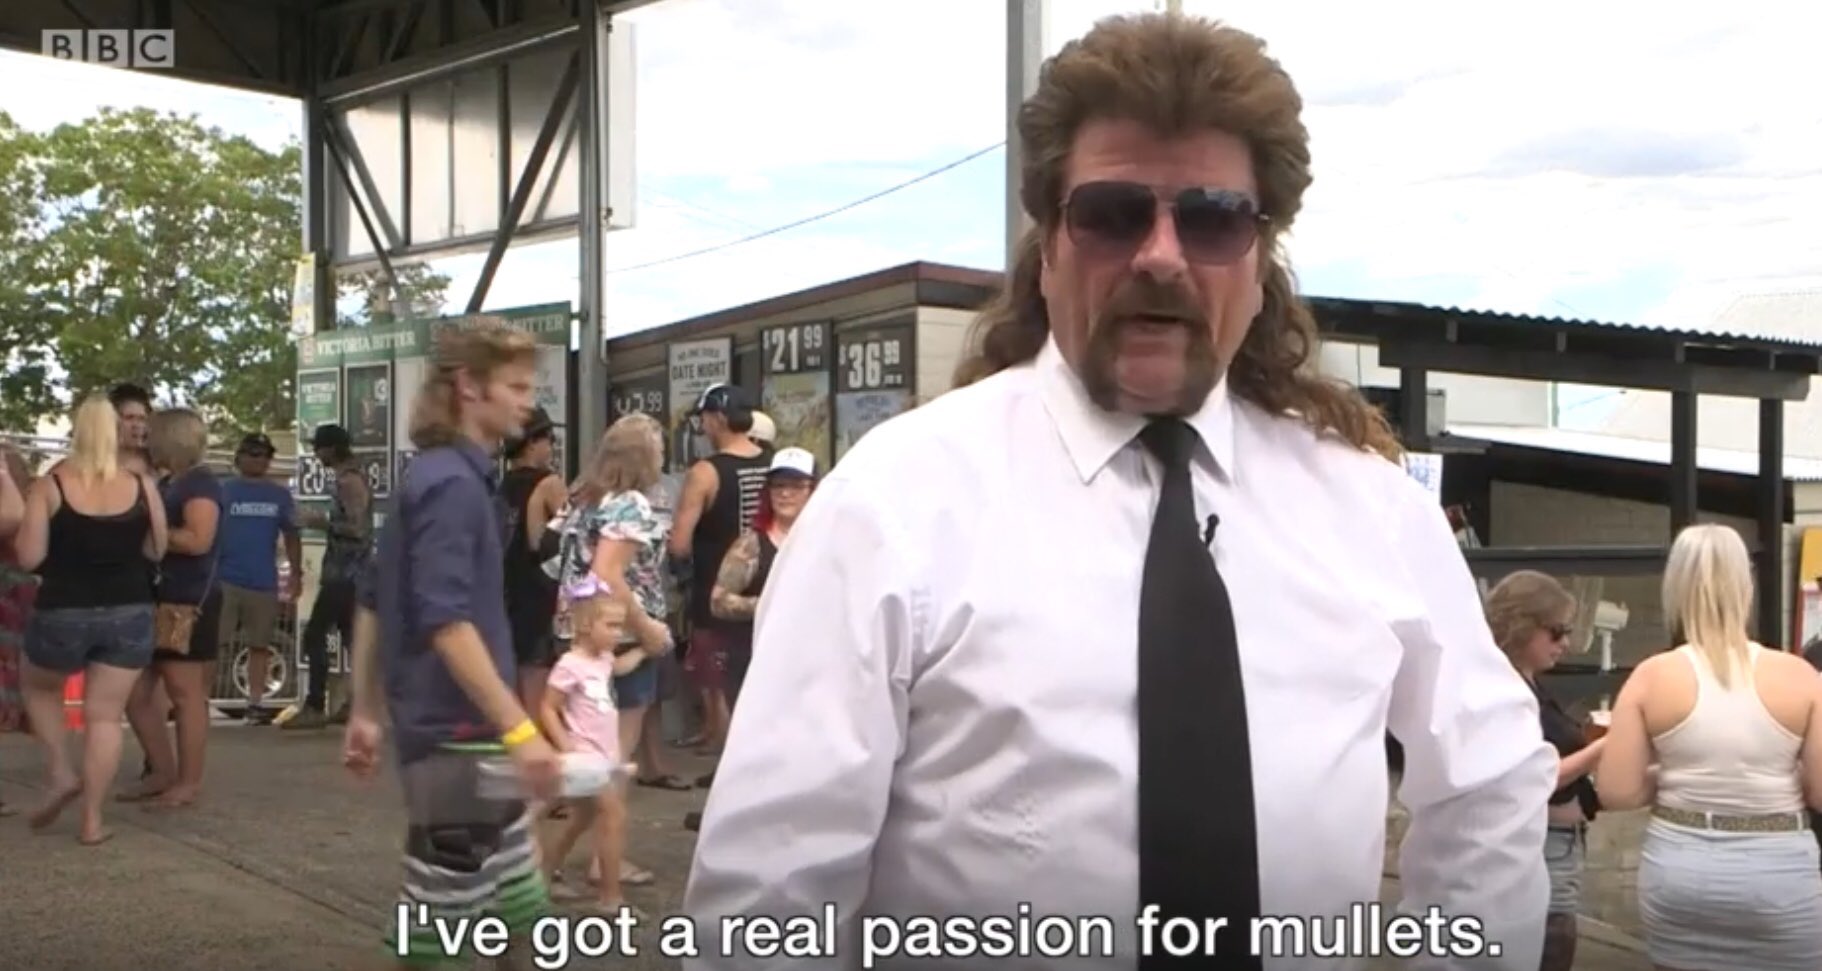 Man with giant mullet says "I've got a real passion for mullets."